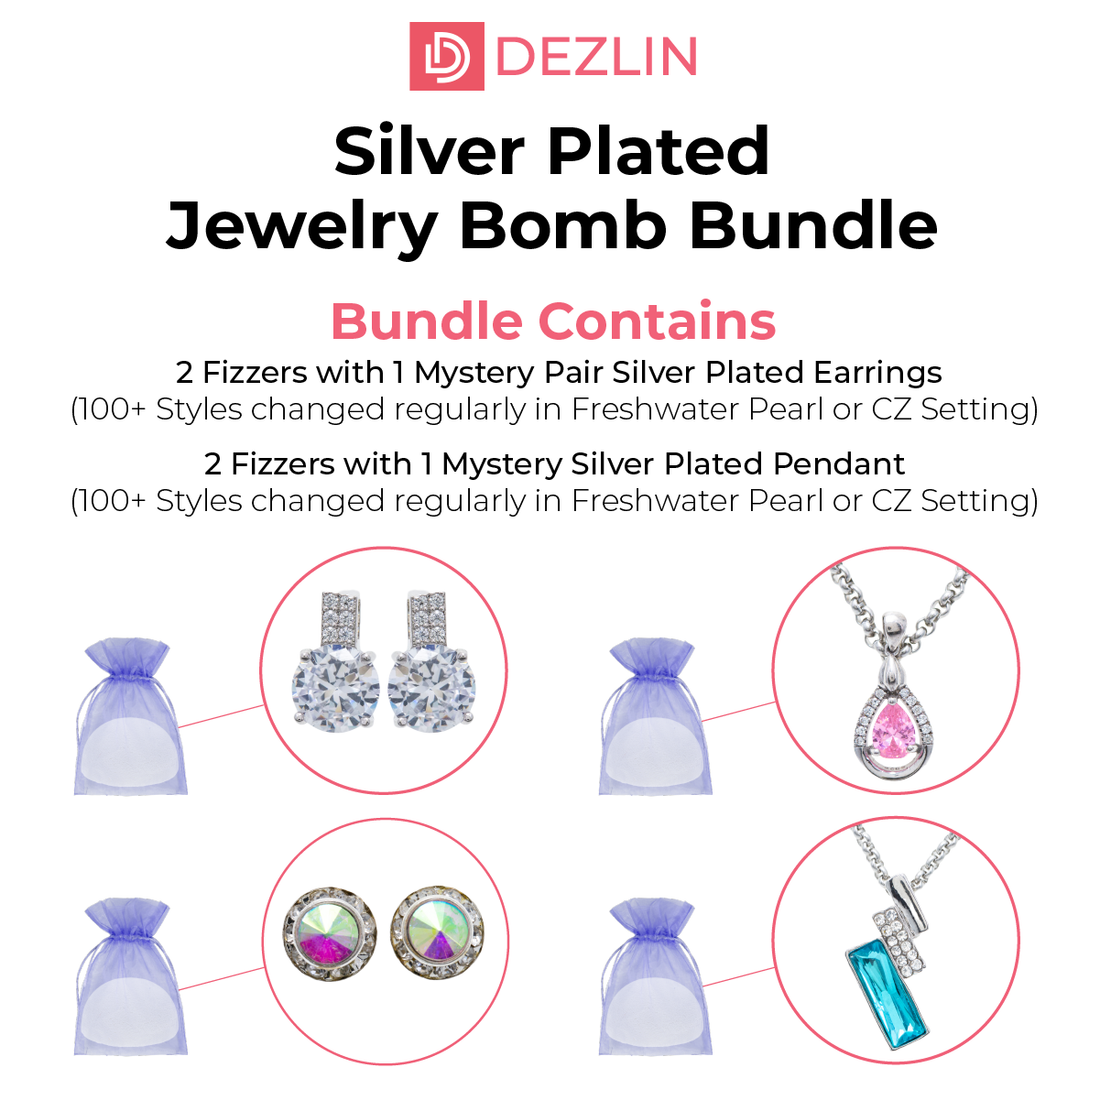 Jewelry Bomb Bundle Silver Plated (4 Bombs)